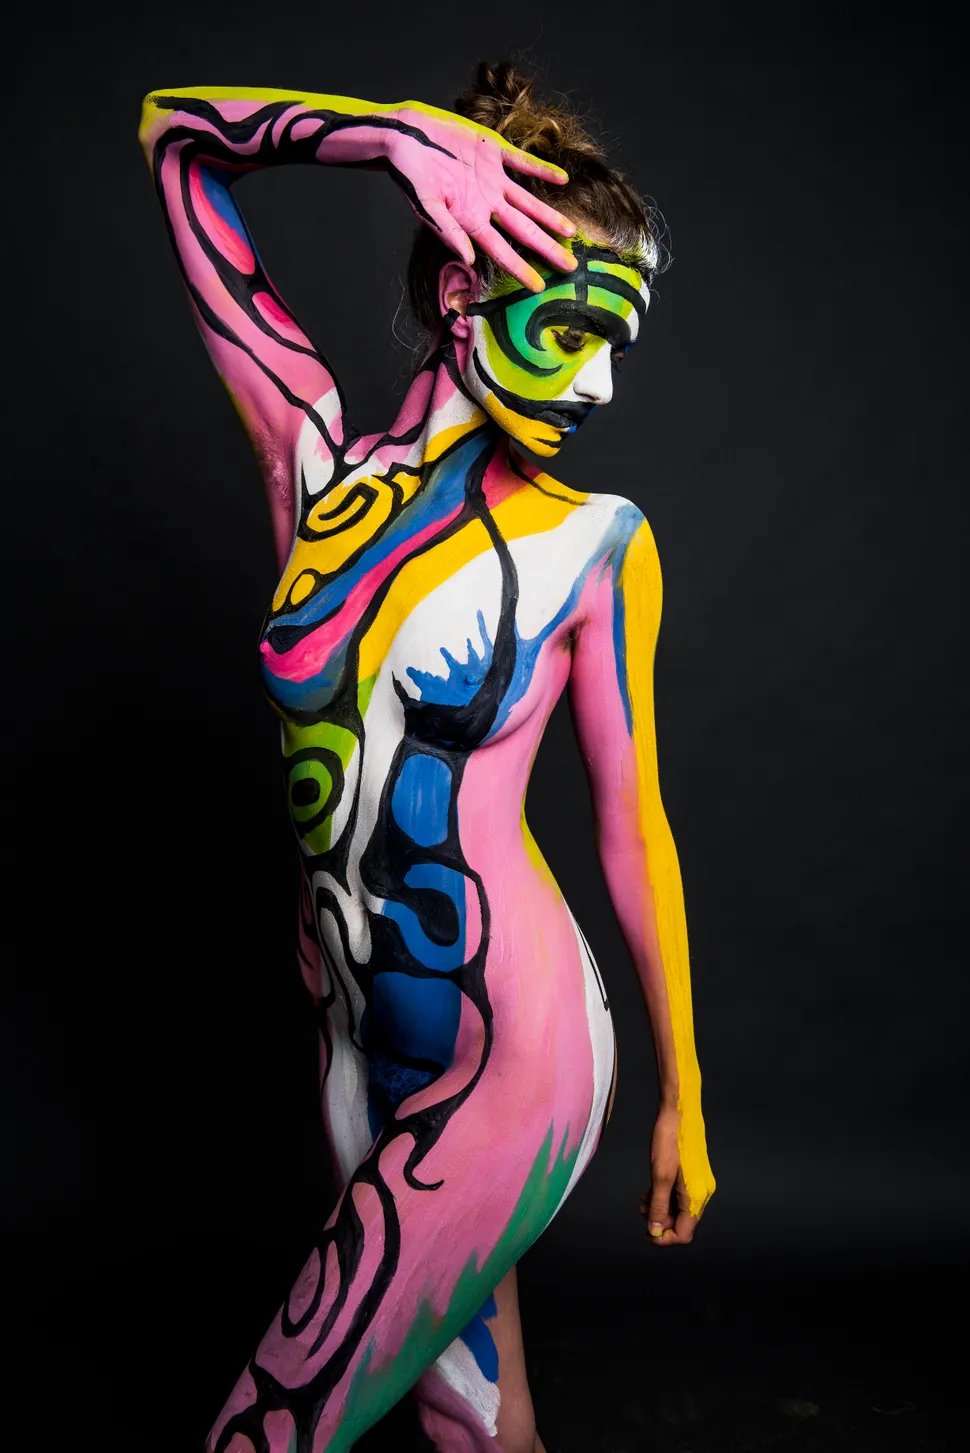 This Is What It's Like To Strip And Get Body Painted For The First Time  (NSFW)